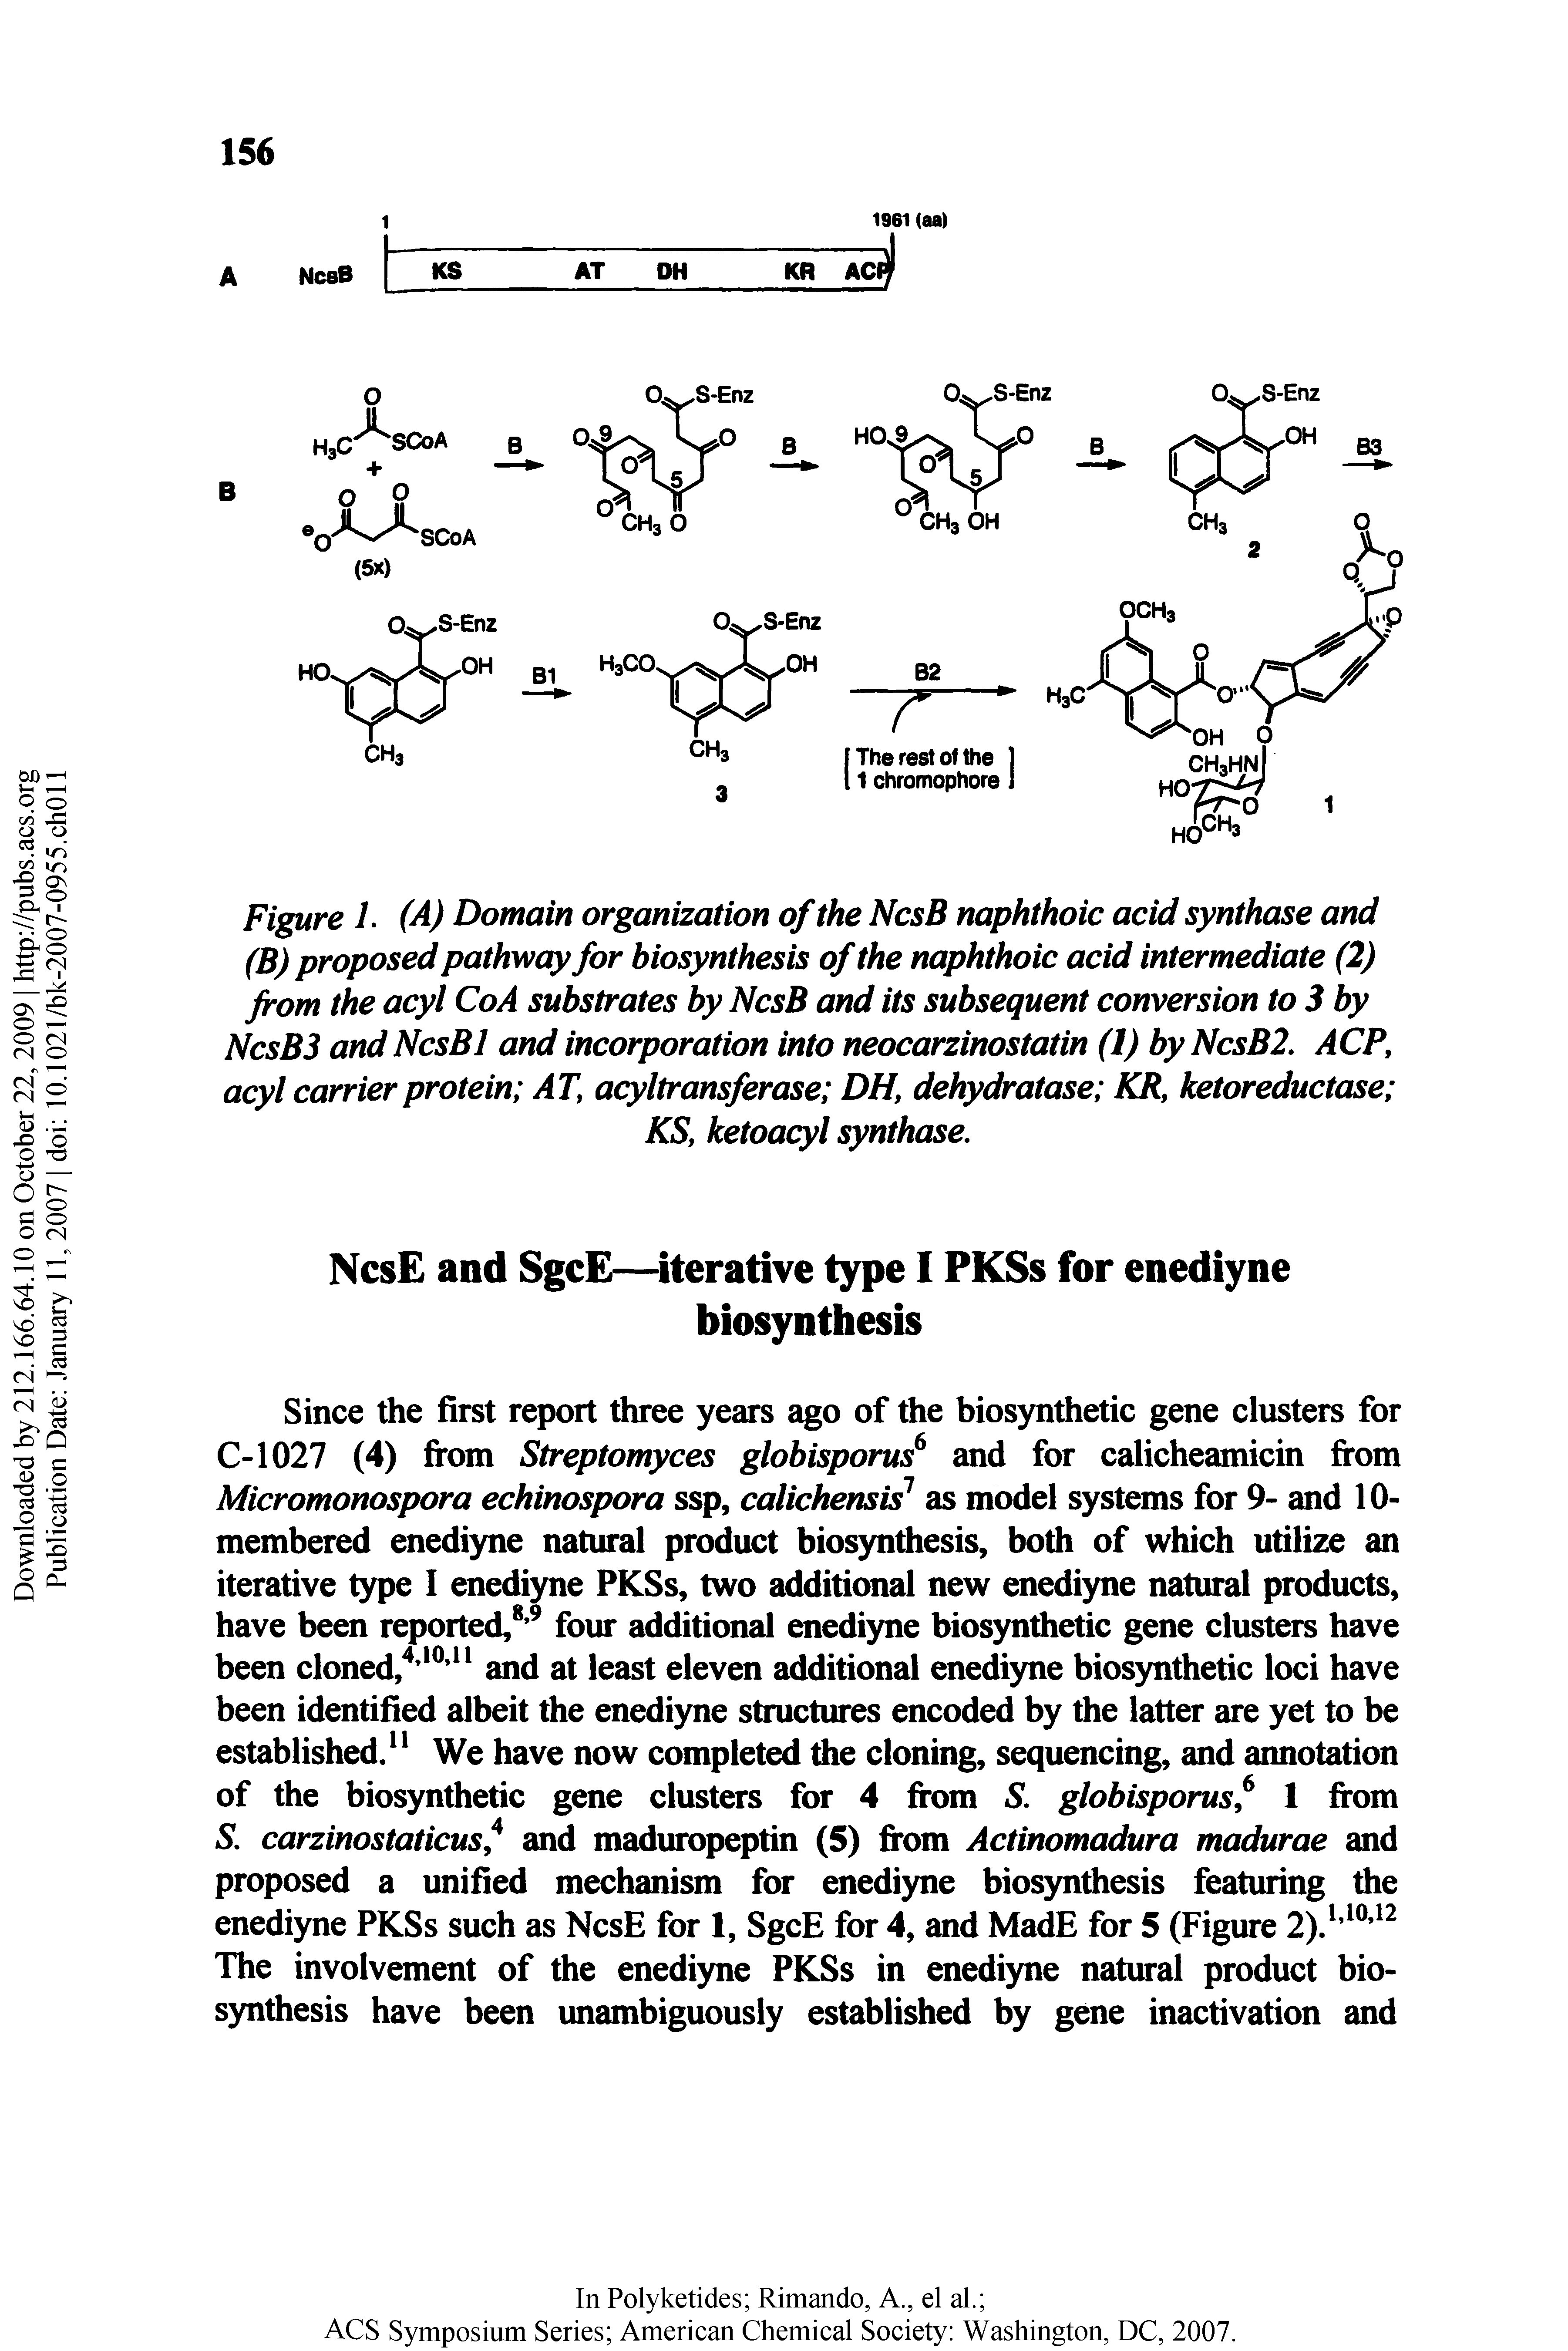 Figure 1. (A) Domain organization of the NcsB naphthoic acid synthase and (B) proposed pathway for biosynthesis of the naphthoic acid intermediate (2) from the acyl CoA substrates by NcsB and its subsequent conversion to 3 by NcsB3 and NcsB 1 and incorporation into neocarzinostatin (I) by NcsB2. ACP, acyl carrier protein AT, acyltransferase DH, dehydratase KR, ketoreductase ...